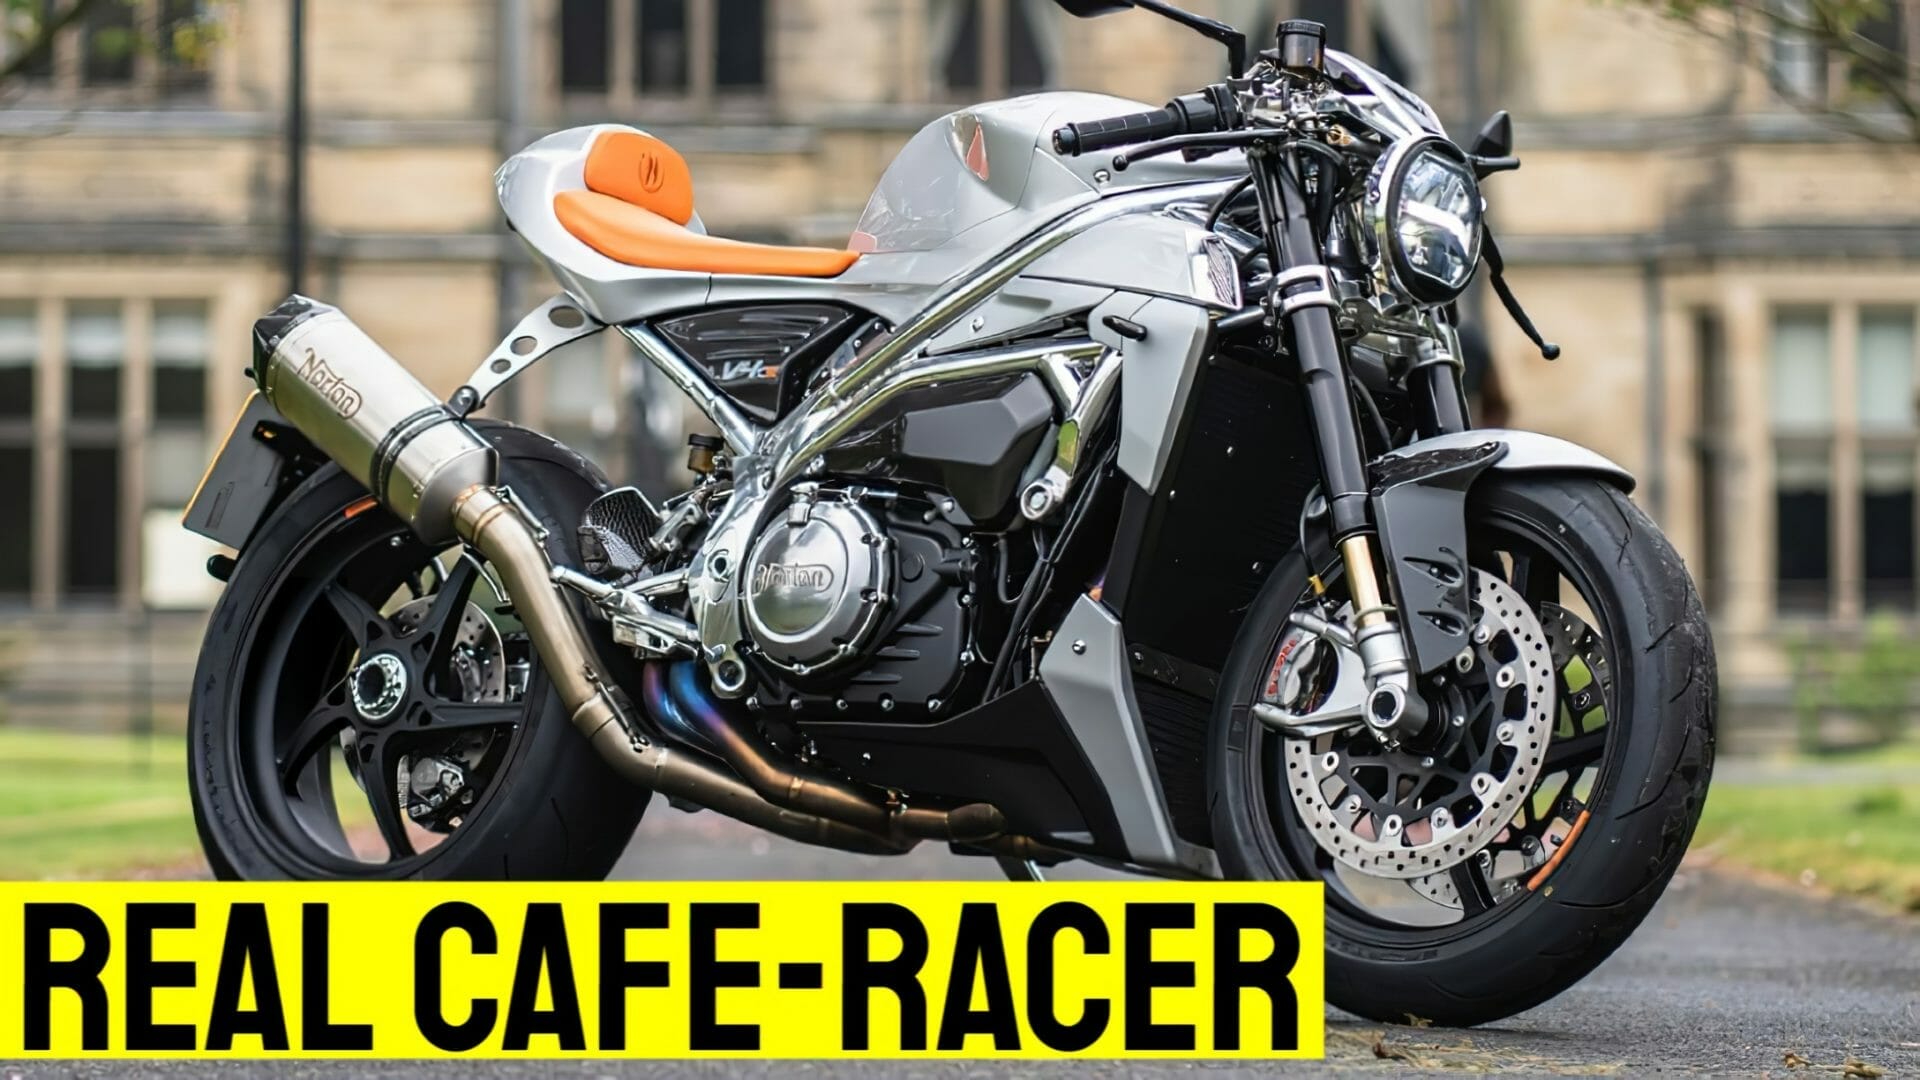 The Norton V4CR: a motorcycle that breathes the racing spirit